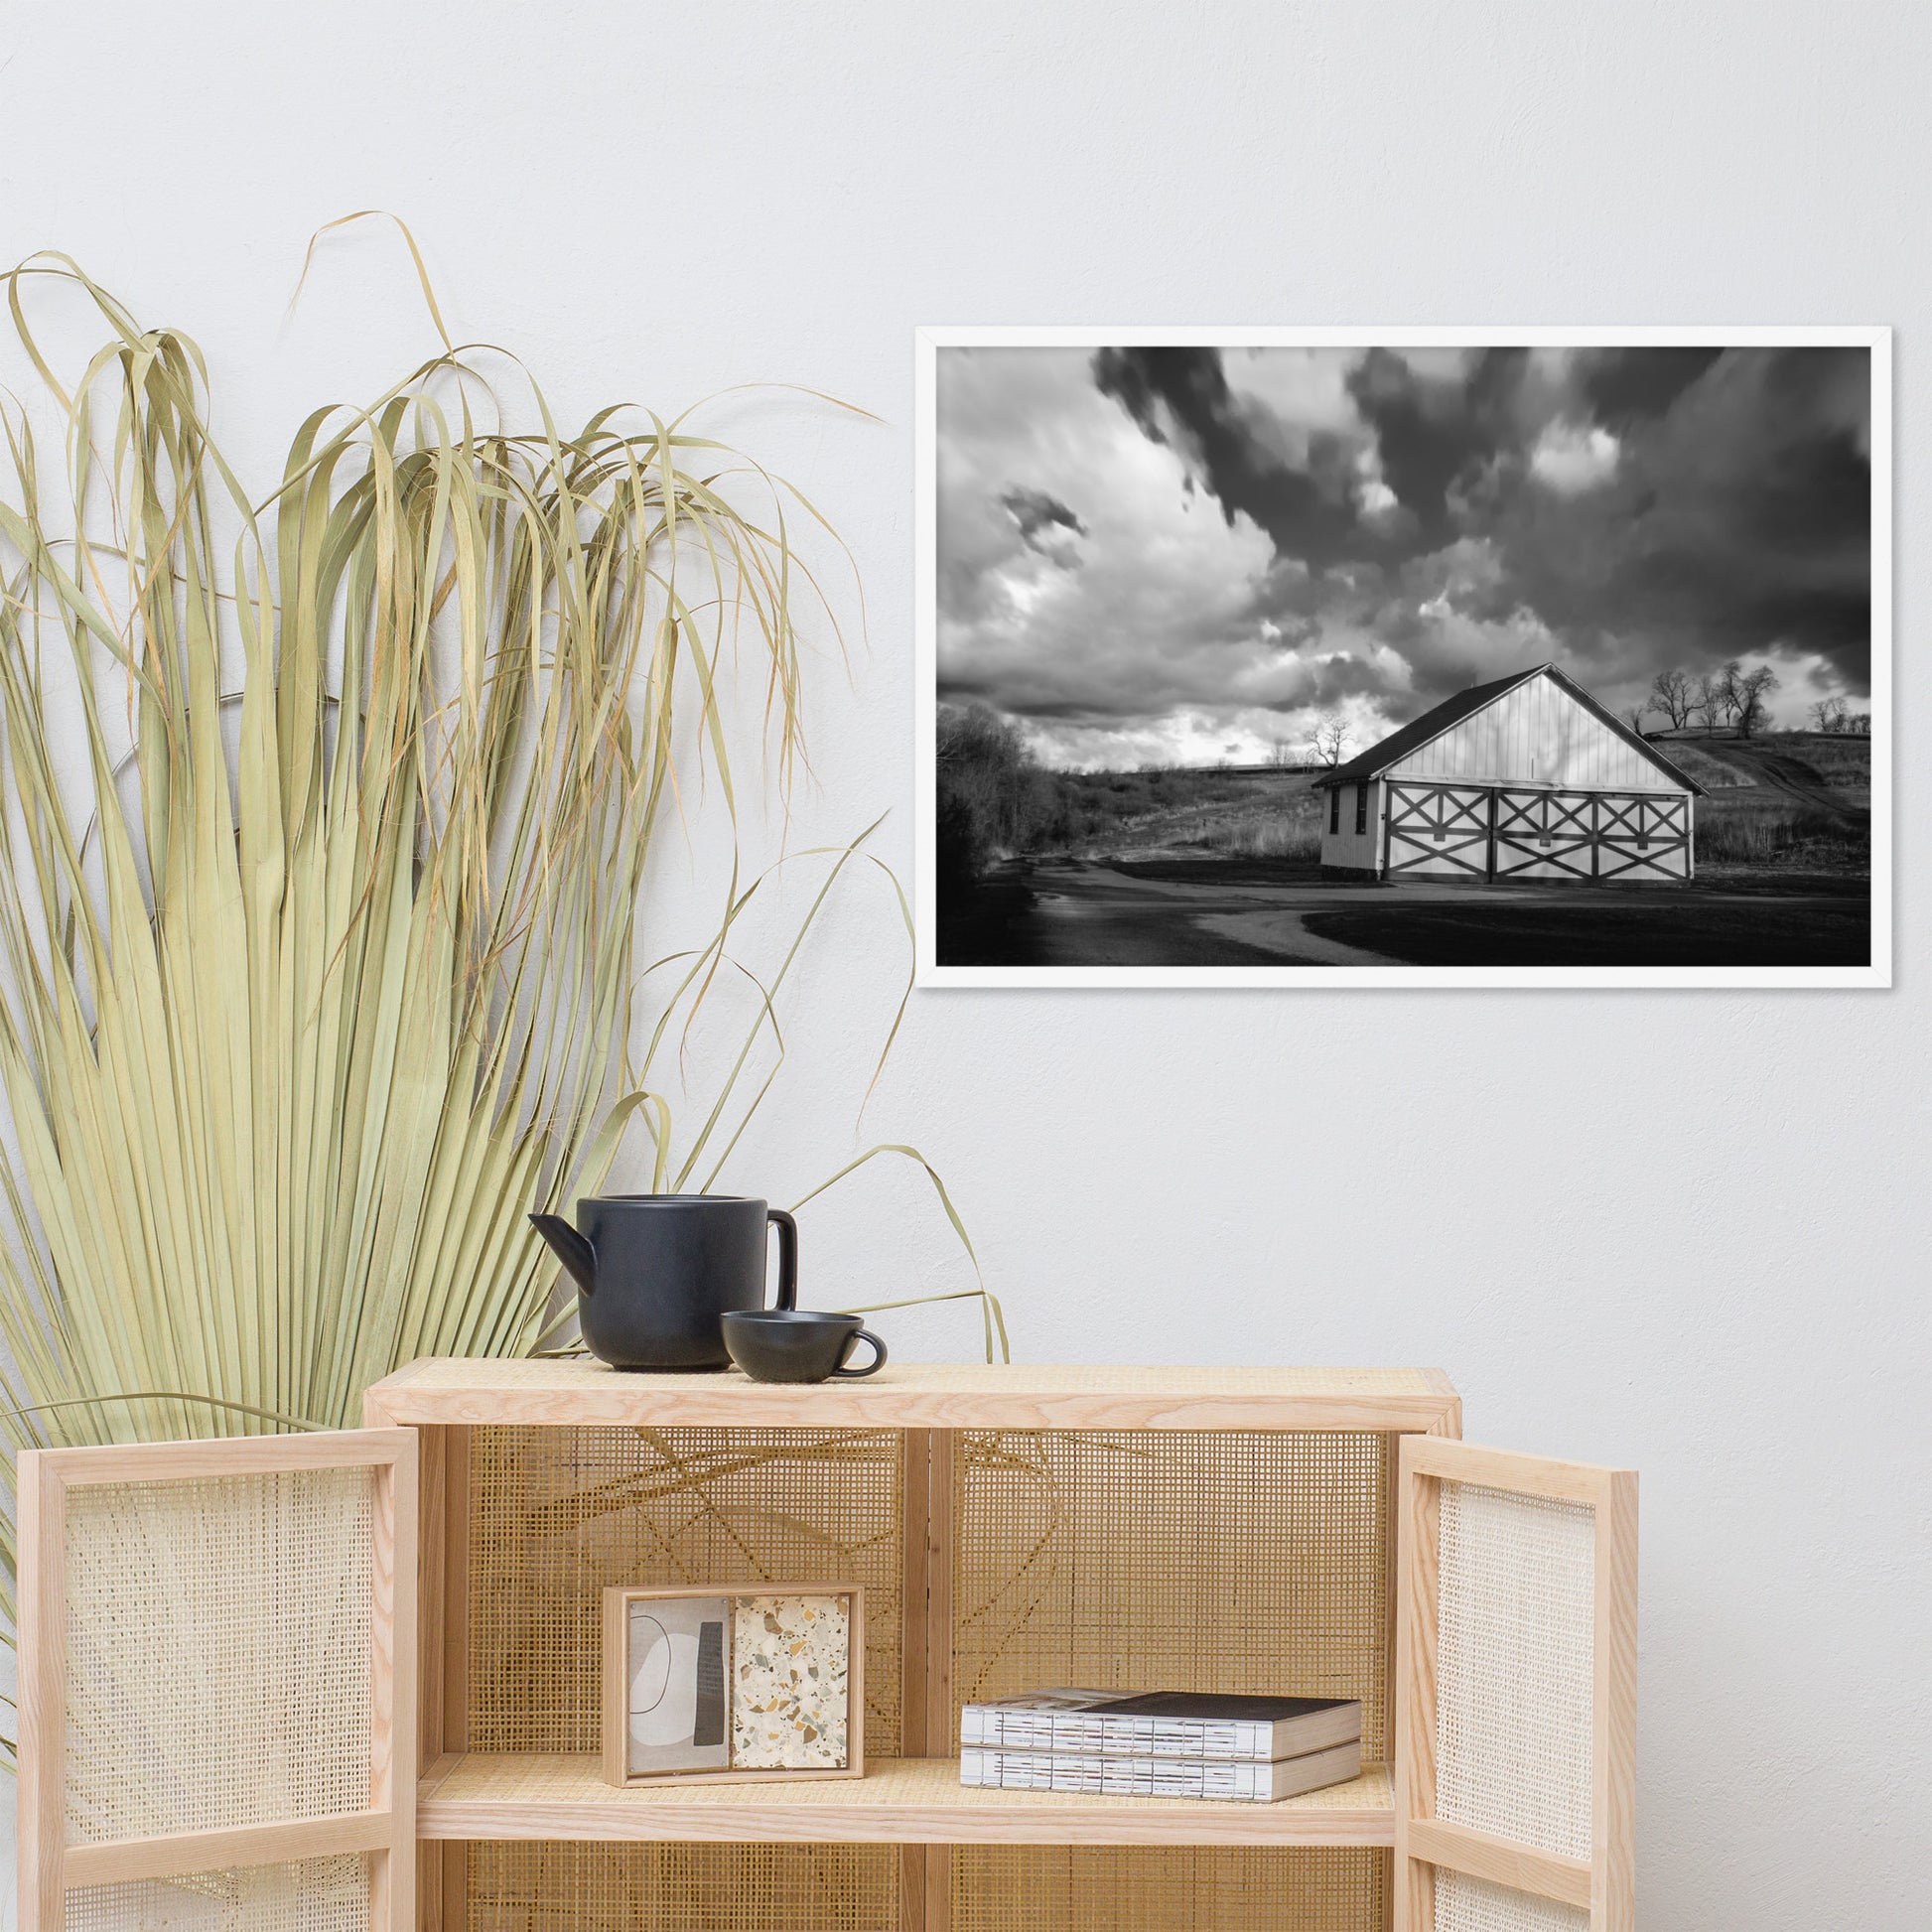 Master Room Wall Decor: Aging Barn in the Morning Sun in Black and White - Rural / Country Style Landscape / Nature Photograph  Framed Wall Art Print - Wall Decor - Artwork